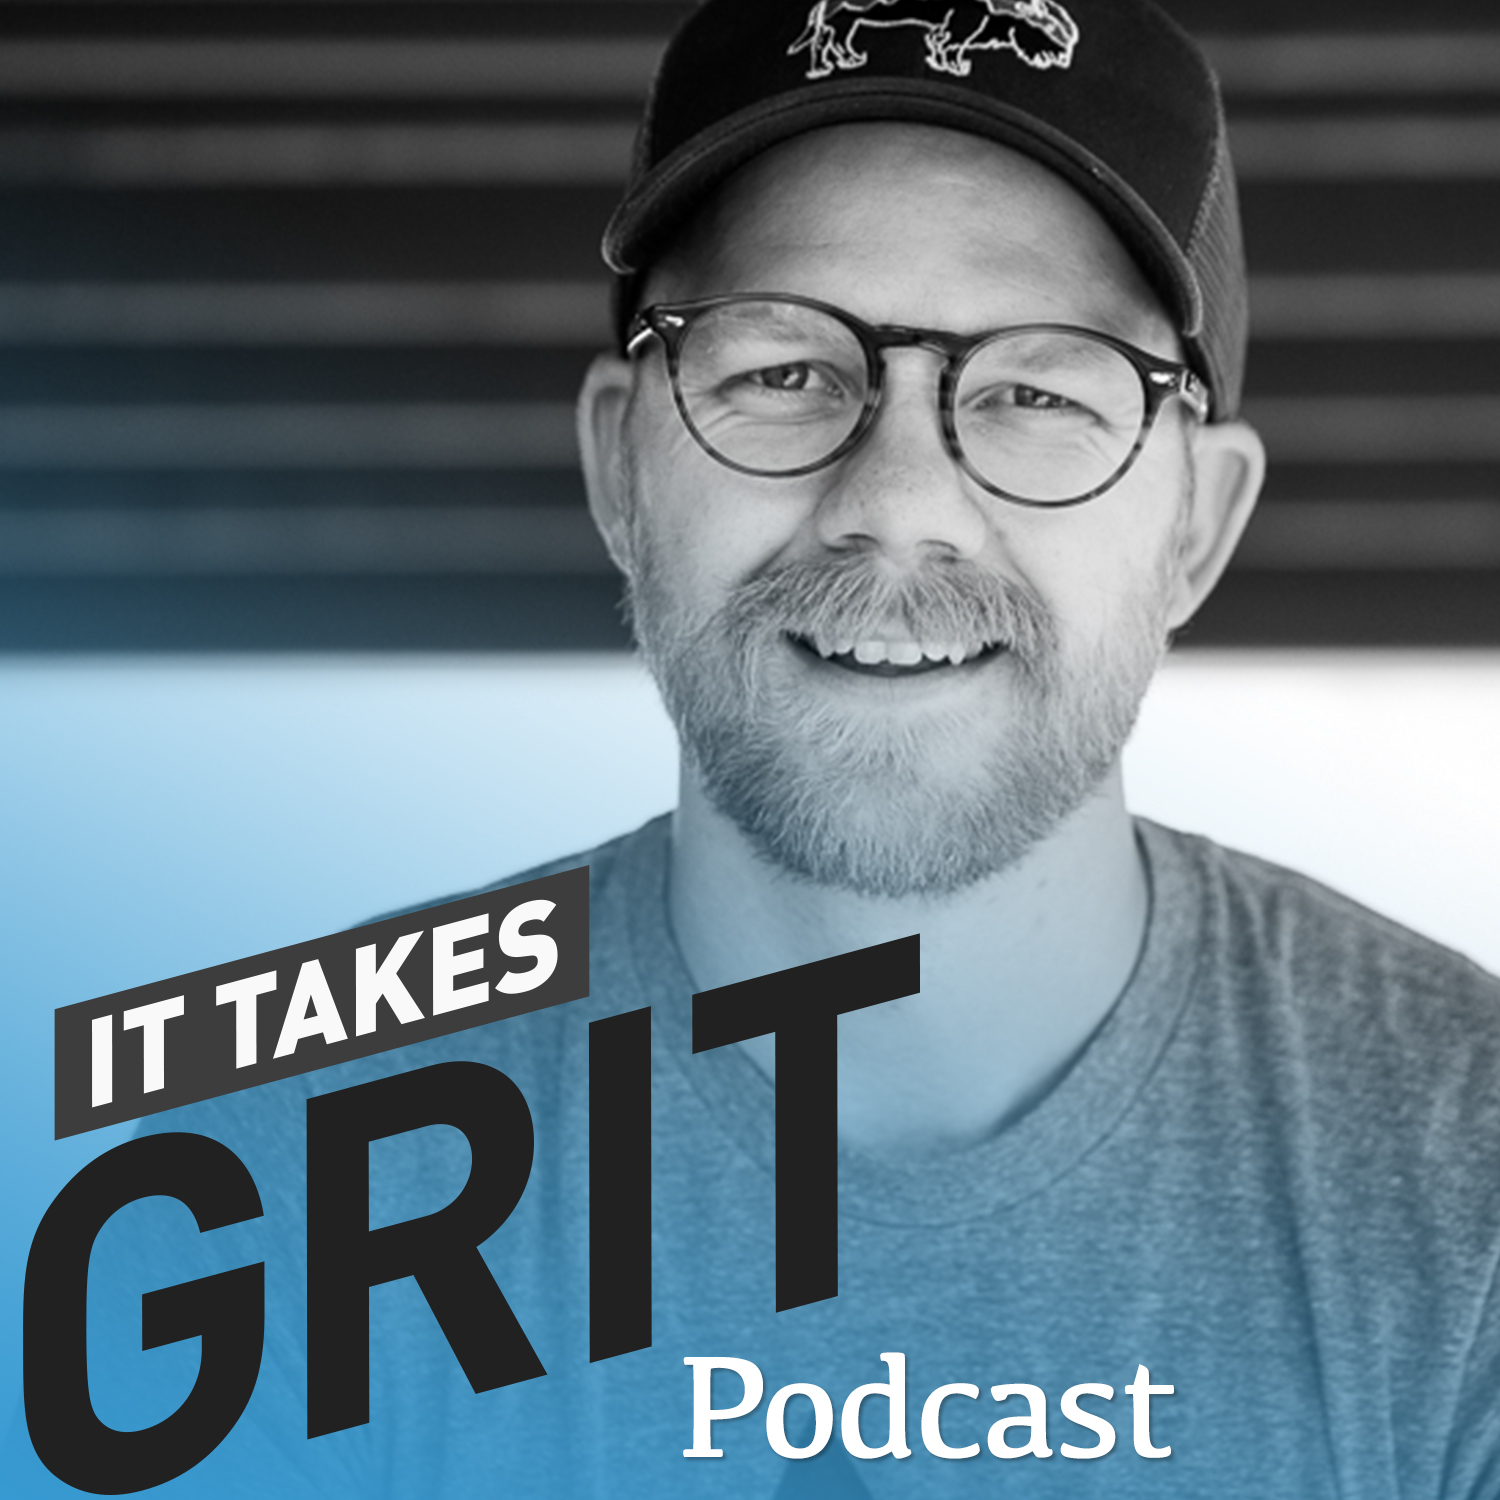 It Takes Grit Podcast